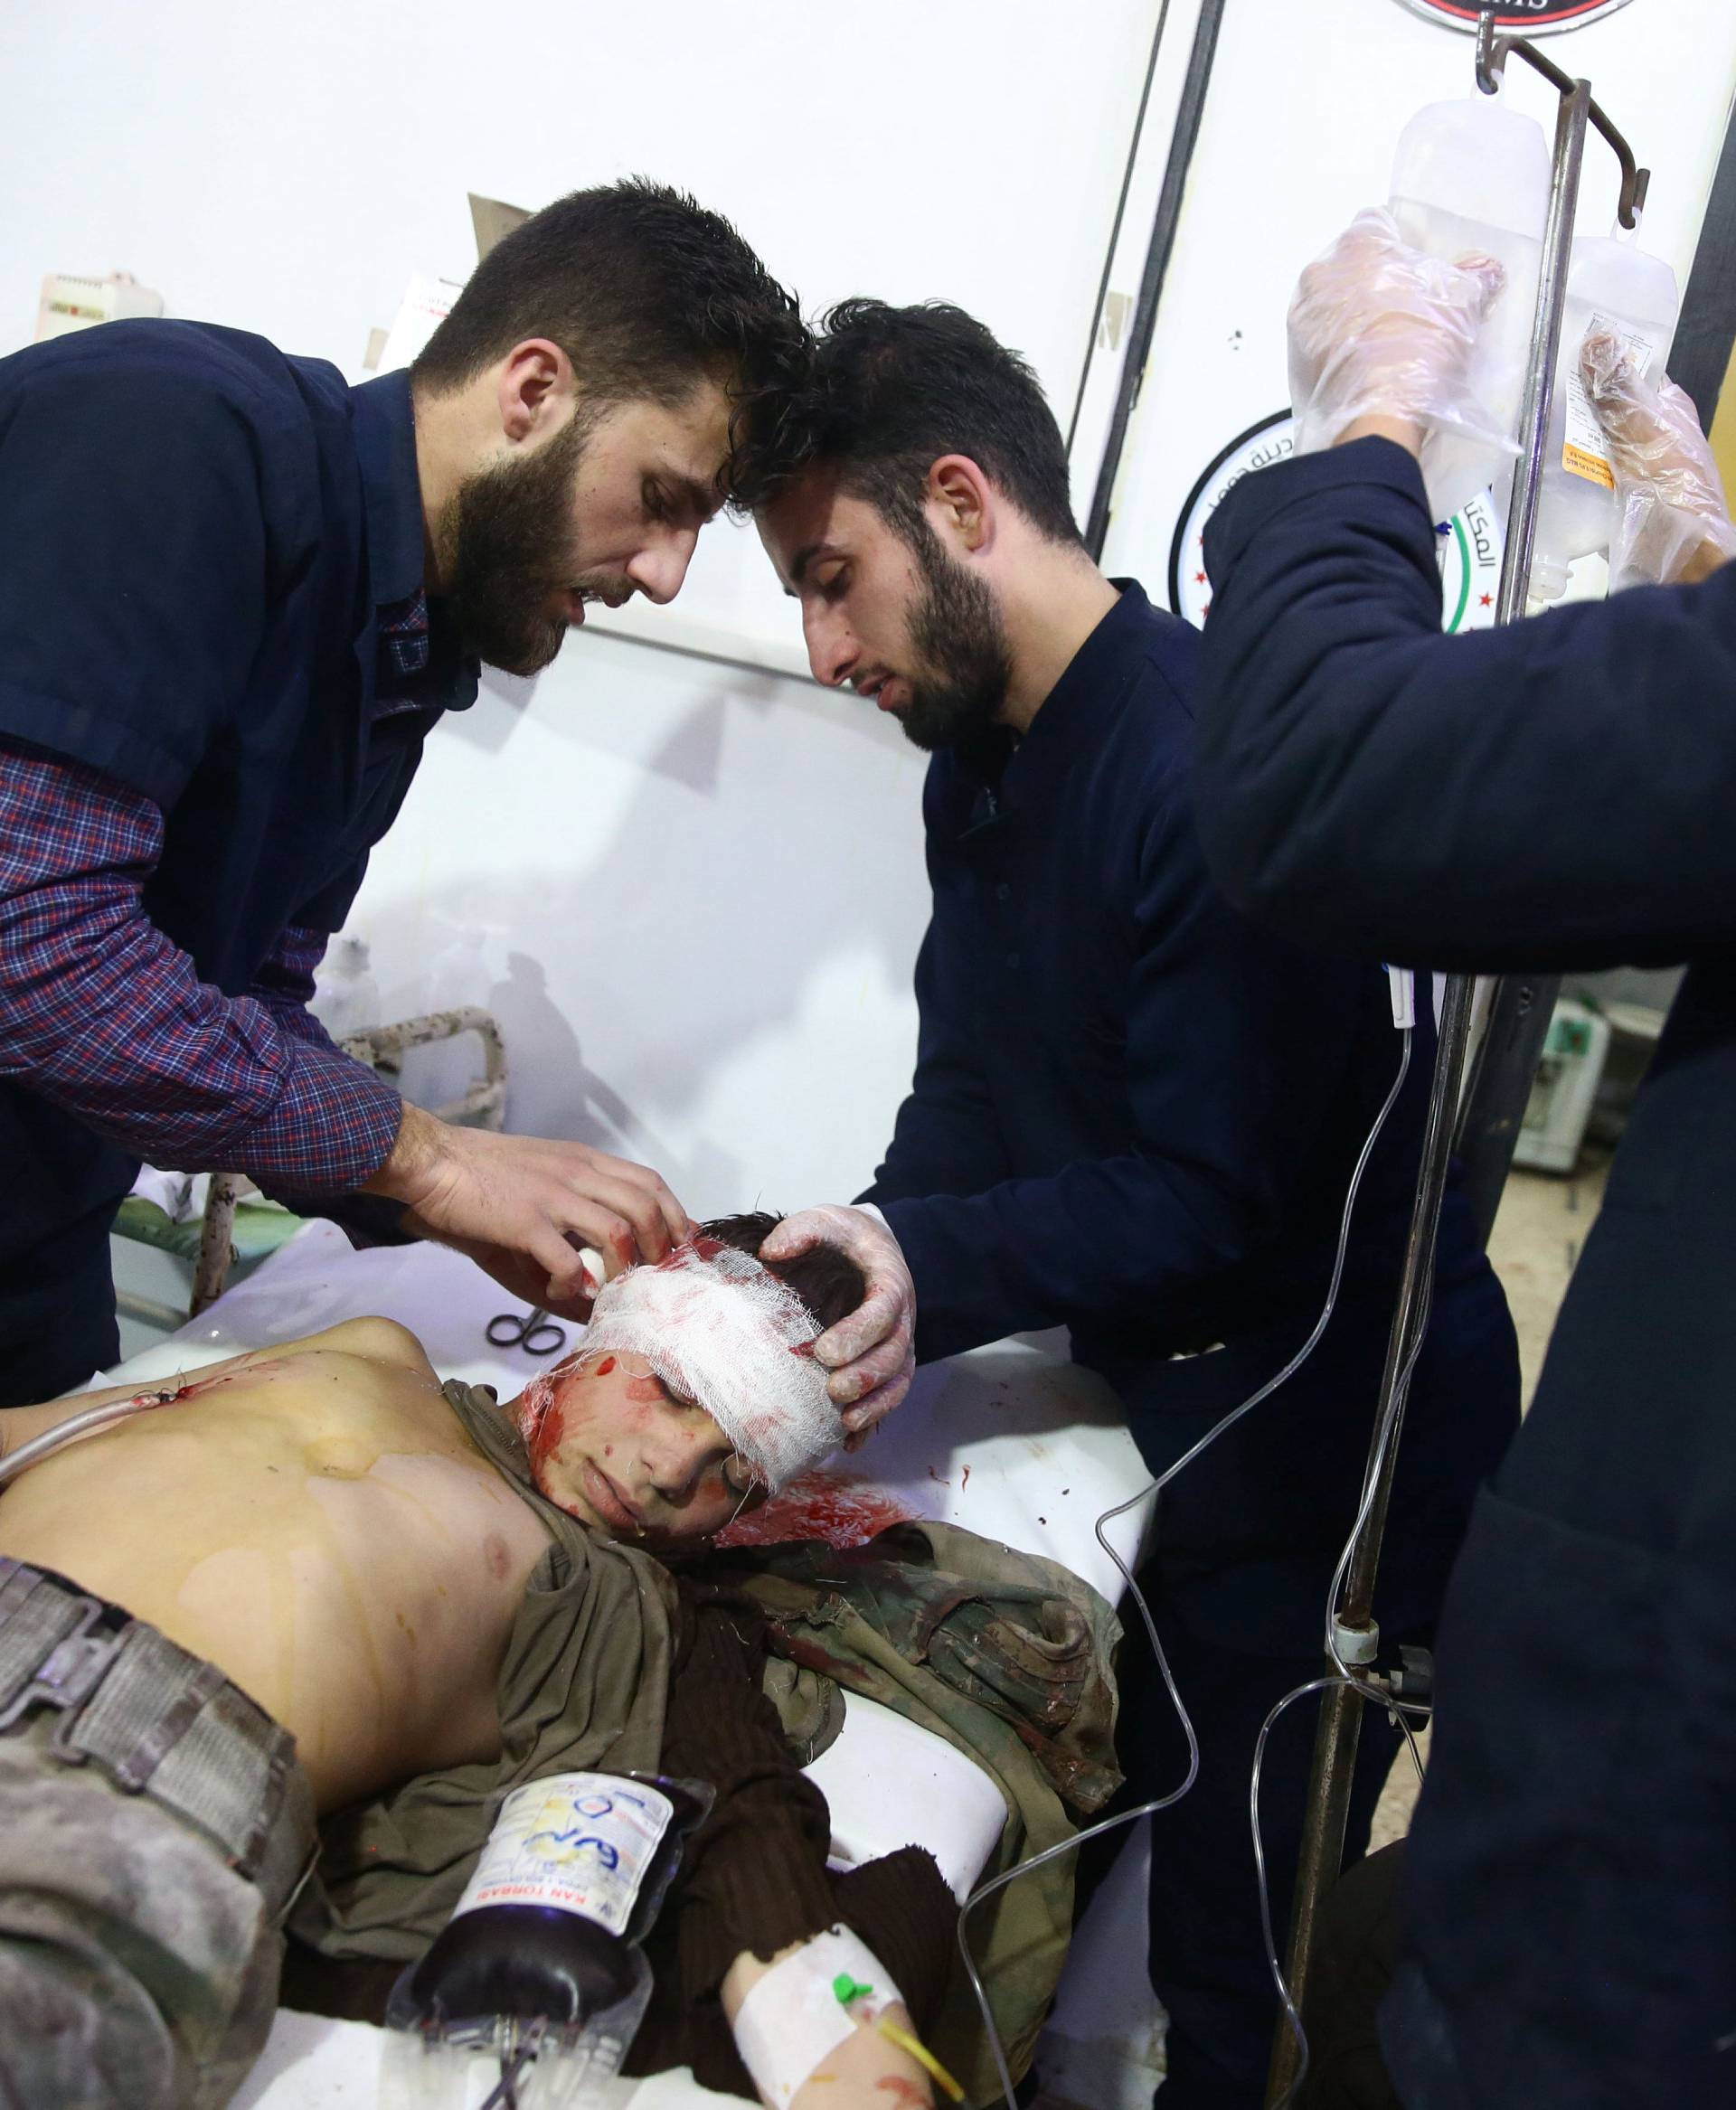 Wounded child receives medical attention at hospital in Douma, Eastern Ghouta, Damascus